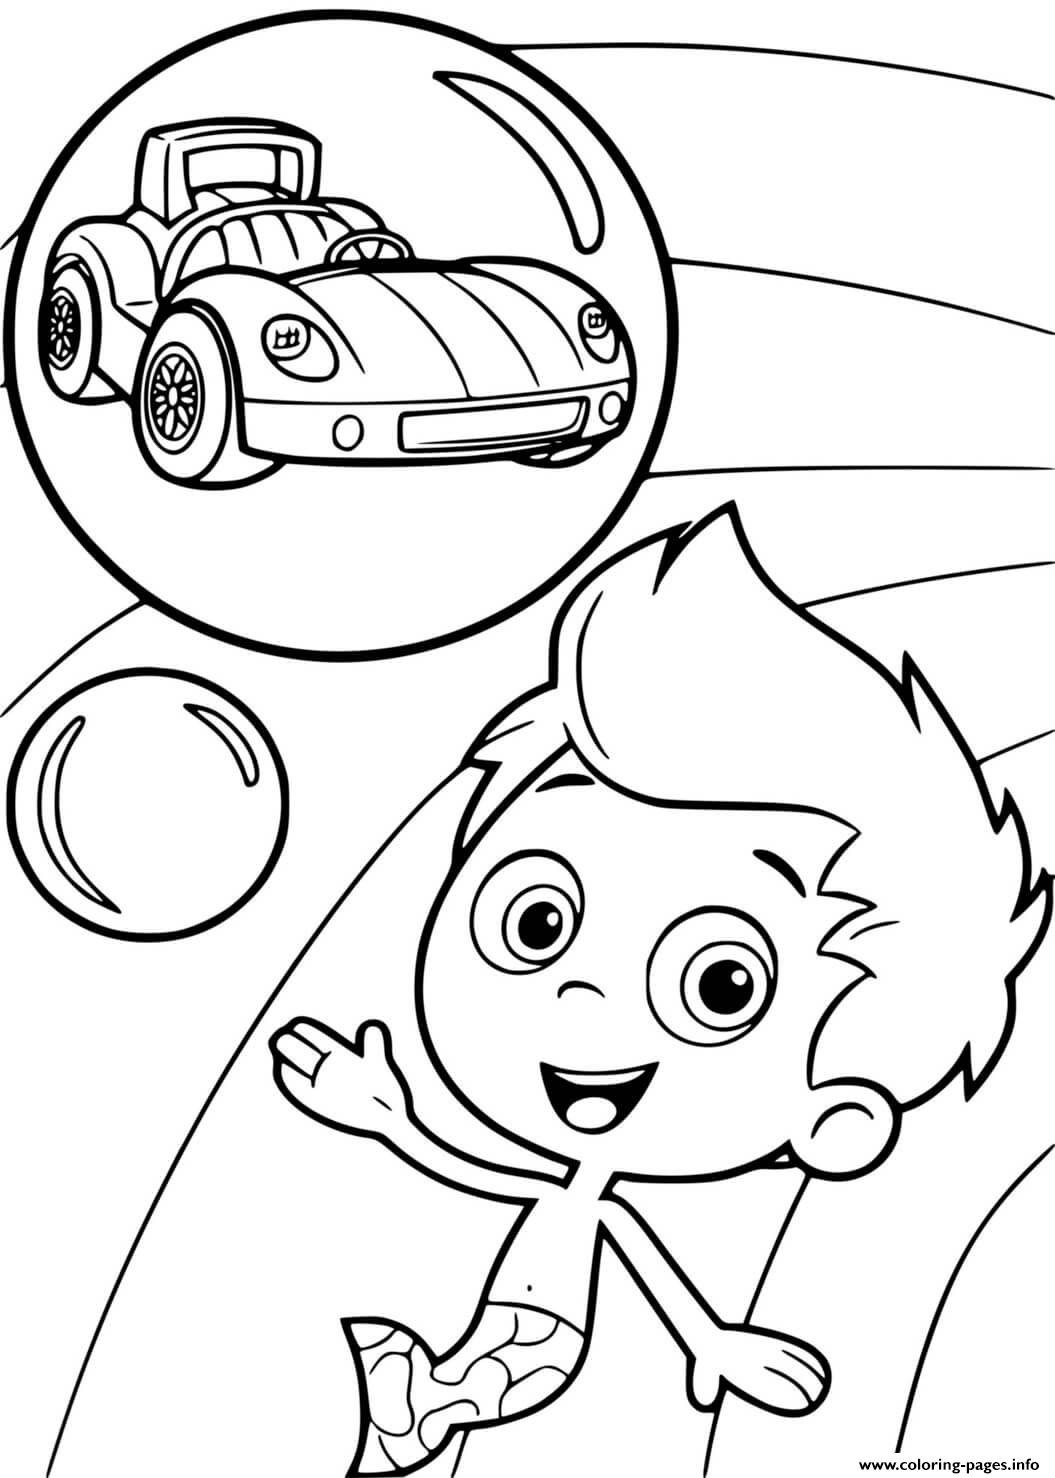 Gil Want To Have A Car In Bubble Guppies coloring pages